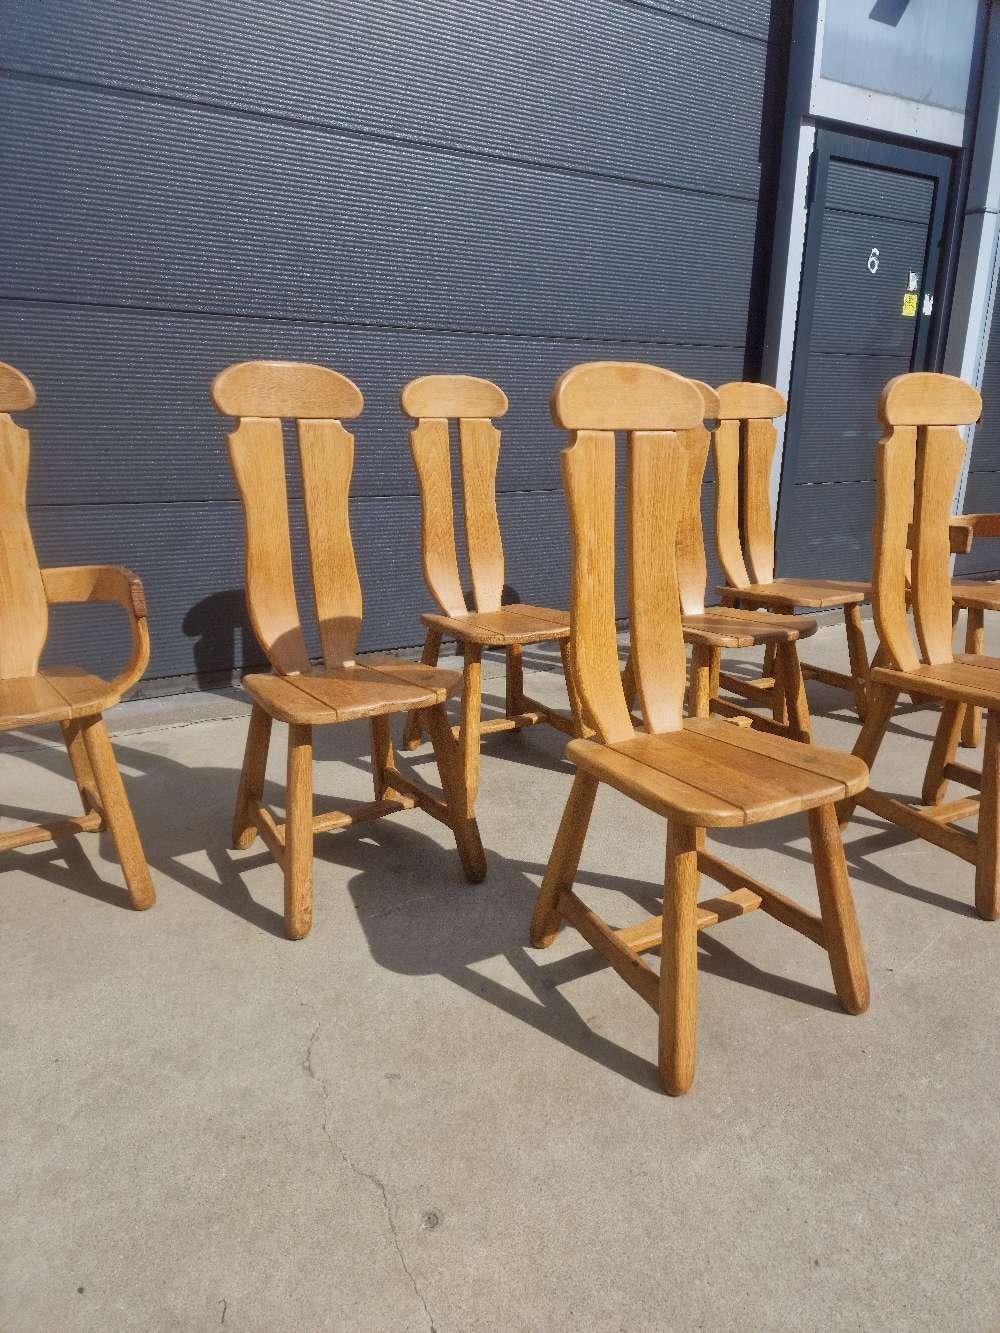 Late 20th Century Set of 8 Brutalist Oak Chairs from De Puydt, Belgium 1970s For Sale